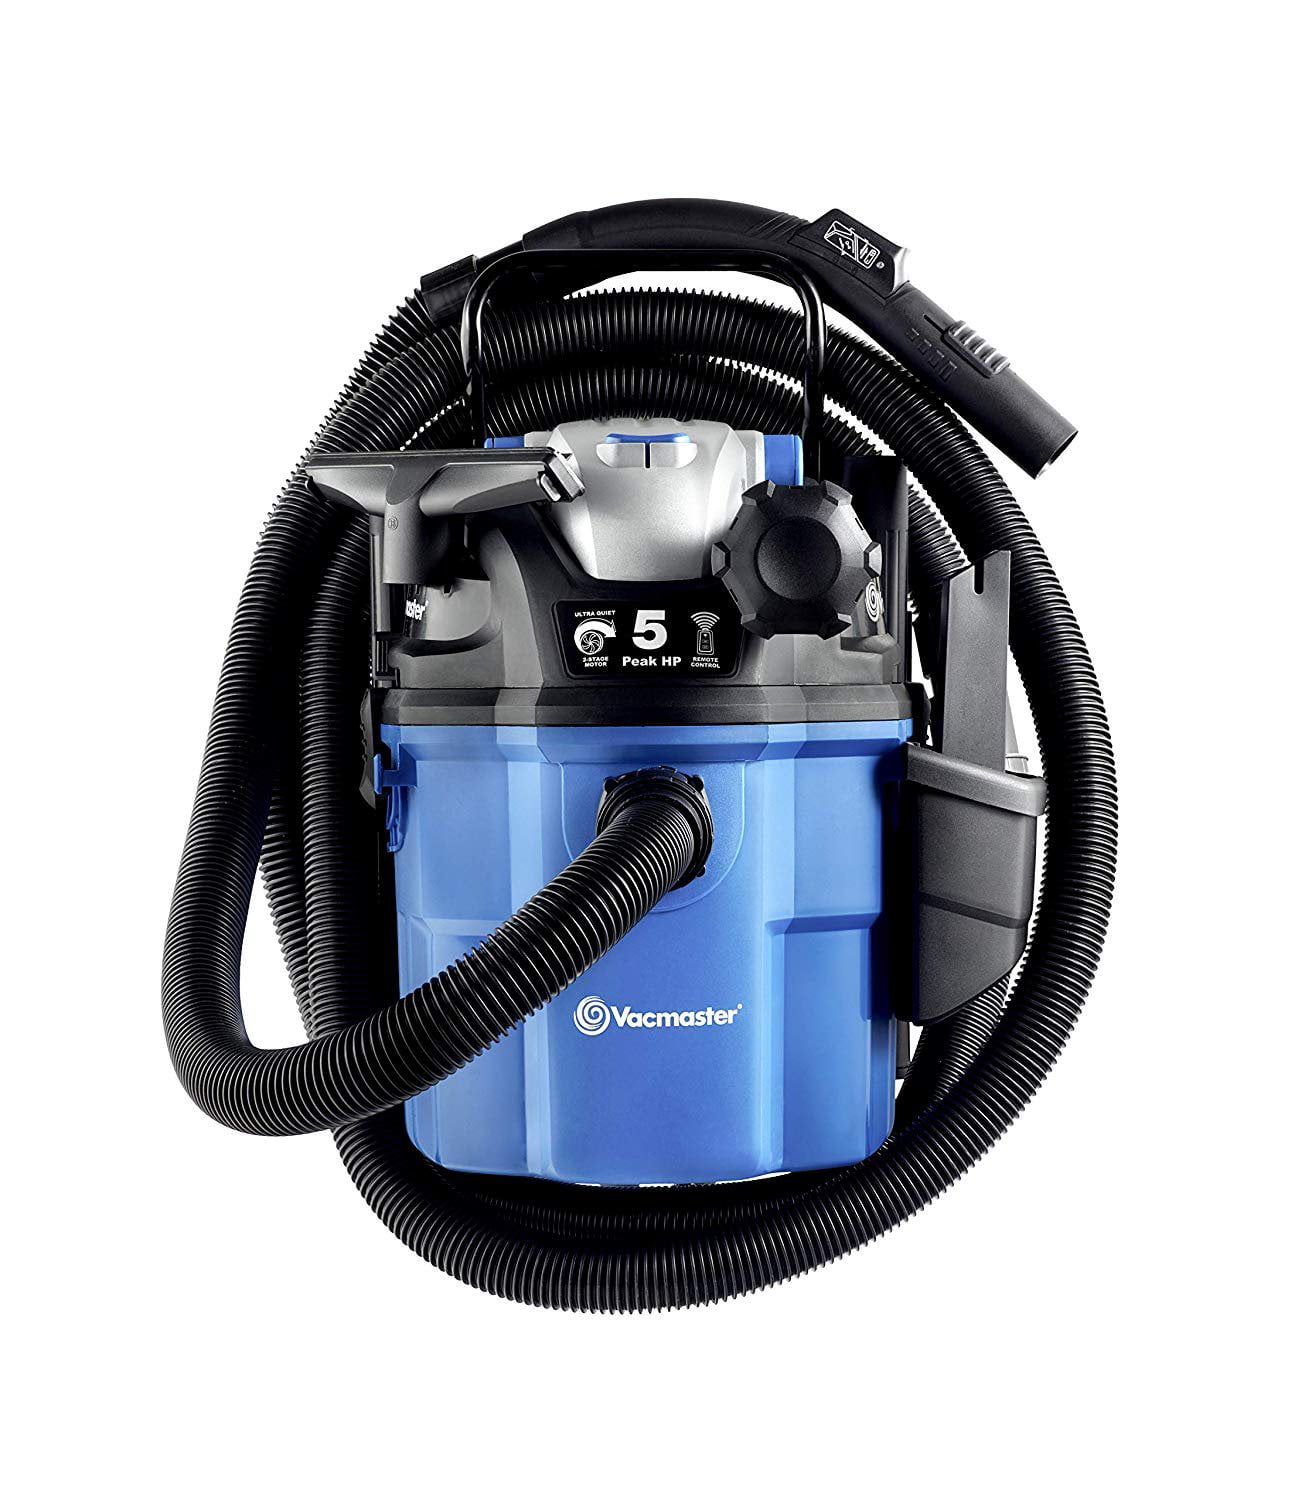 Wet//Dry Vacuum with 2-Stage Motor Wall Mountable and with Remote Control 5 Peak HP Vacmaster 5 Gallon